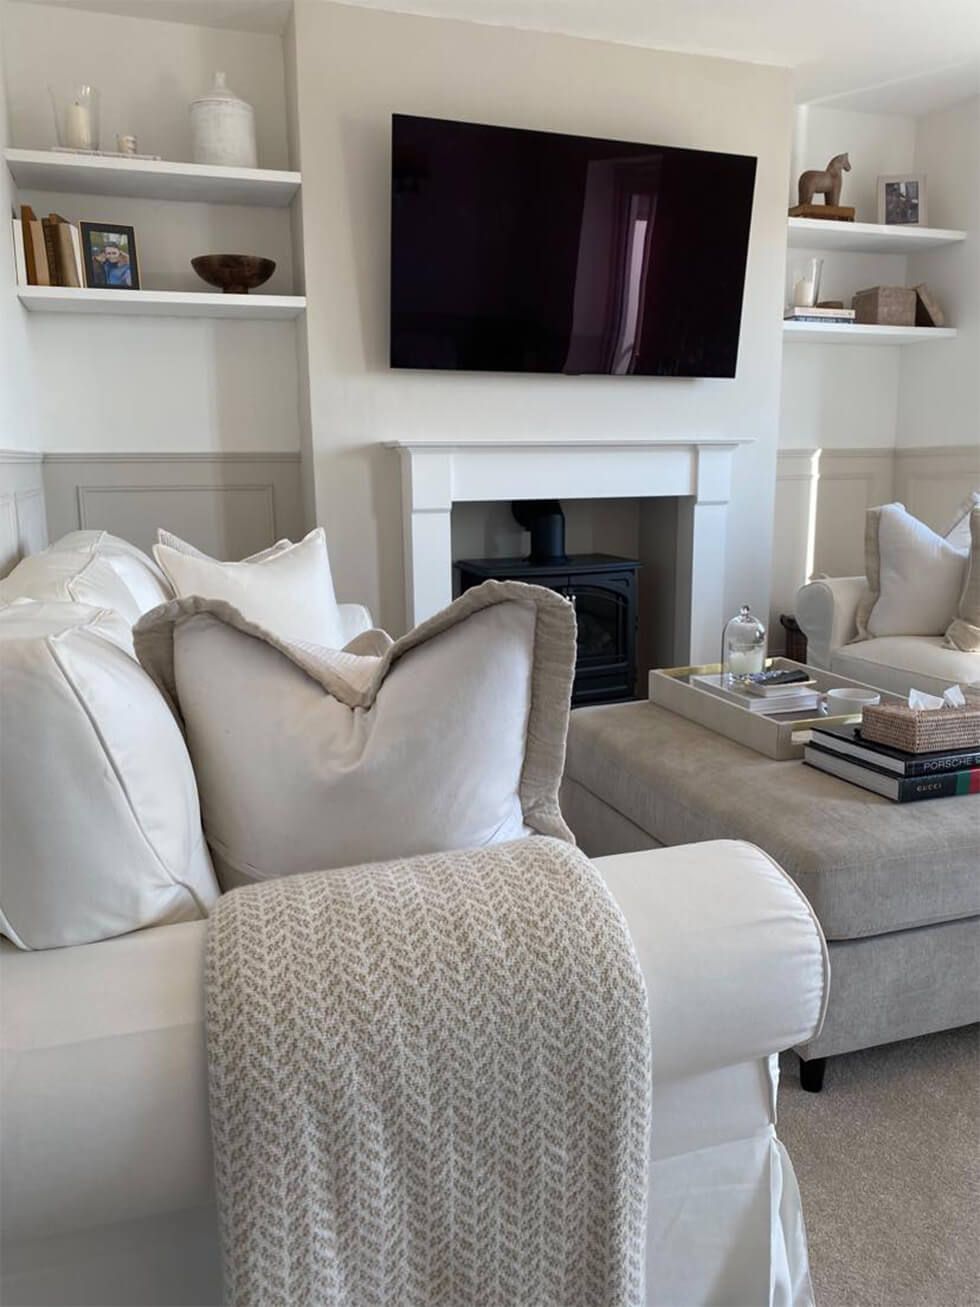 A cosy neutral living room with comfy cushions and open shelving at the back